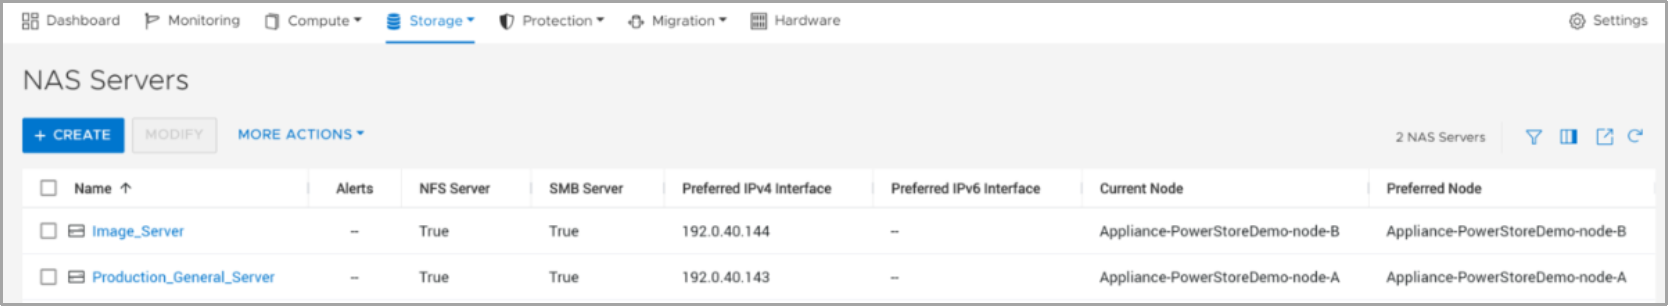 This figure shows the current and preferred node columns in PowerStore Manager for NAS Servers. 